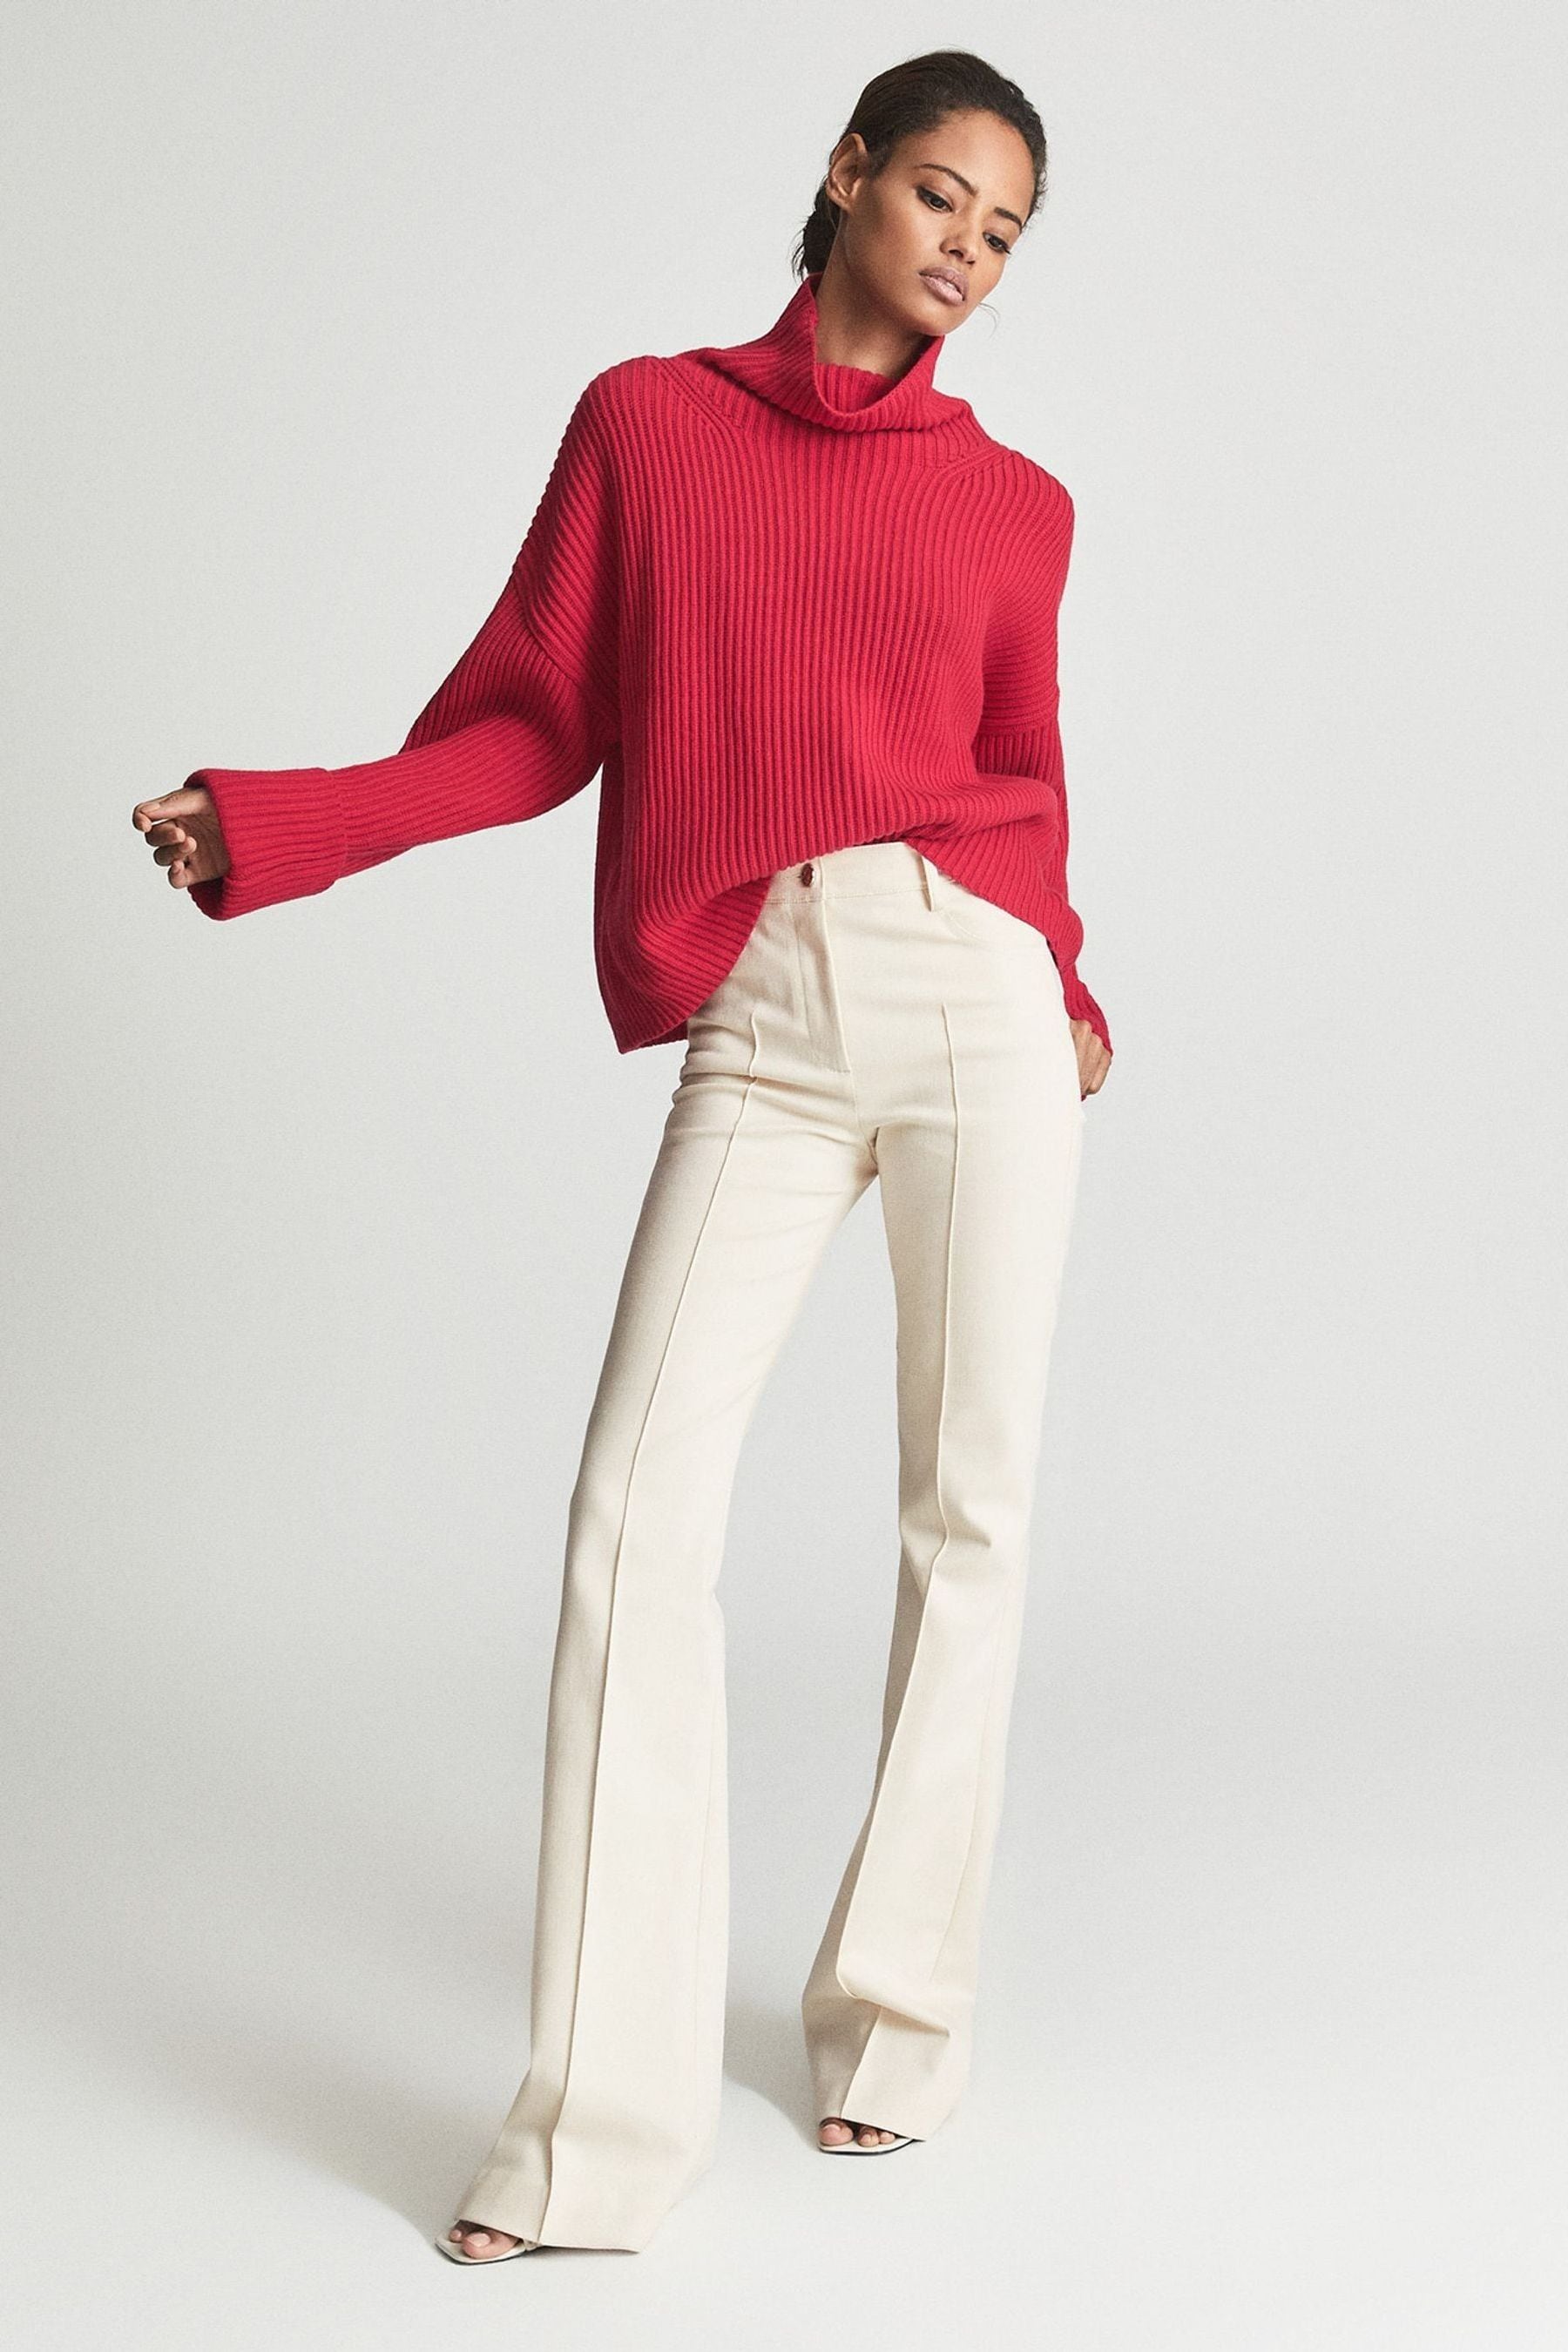 Women's REISS Tops On Sale, Up To 70% Off | ModeSens